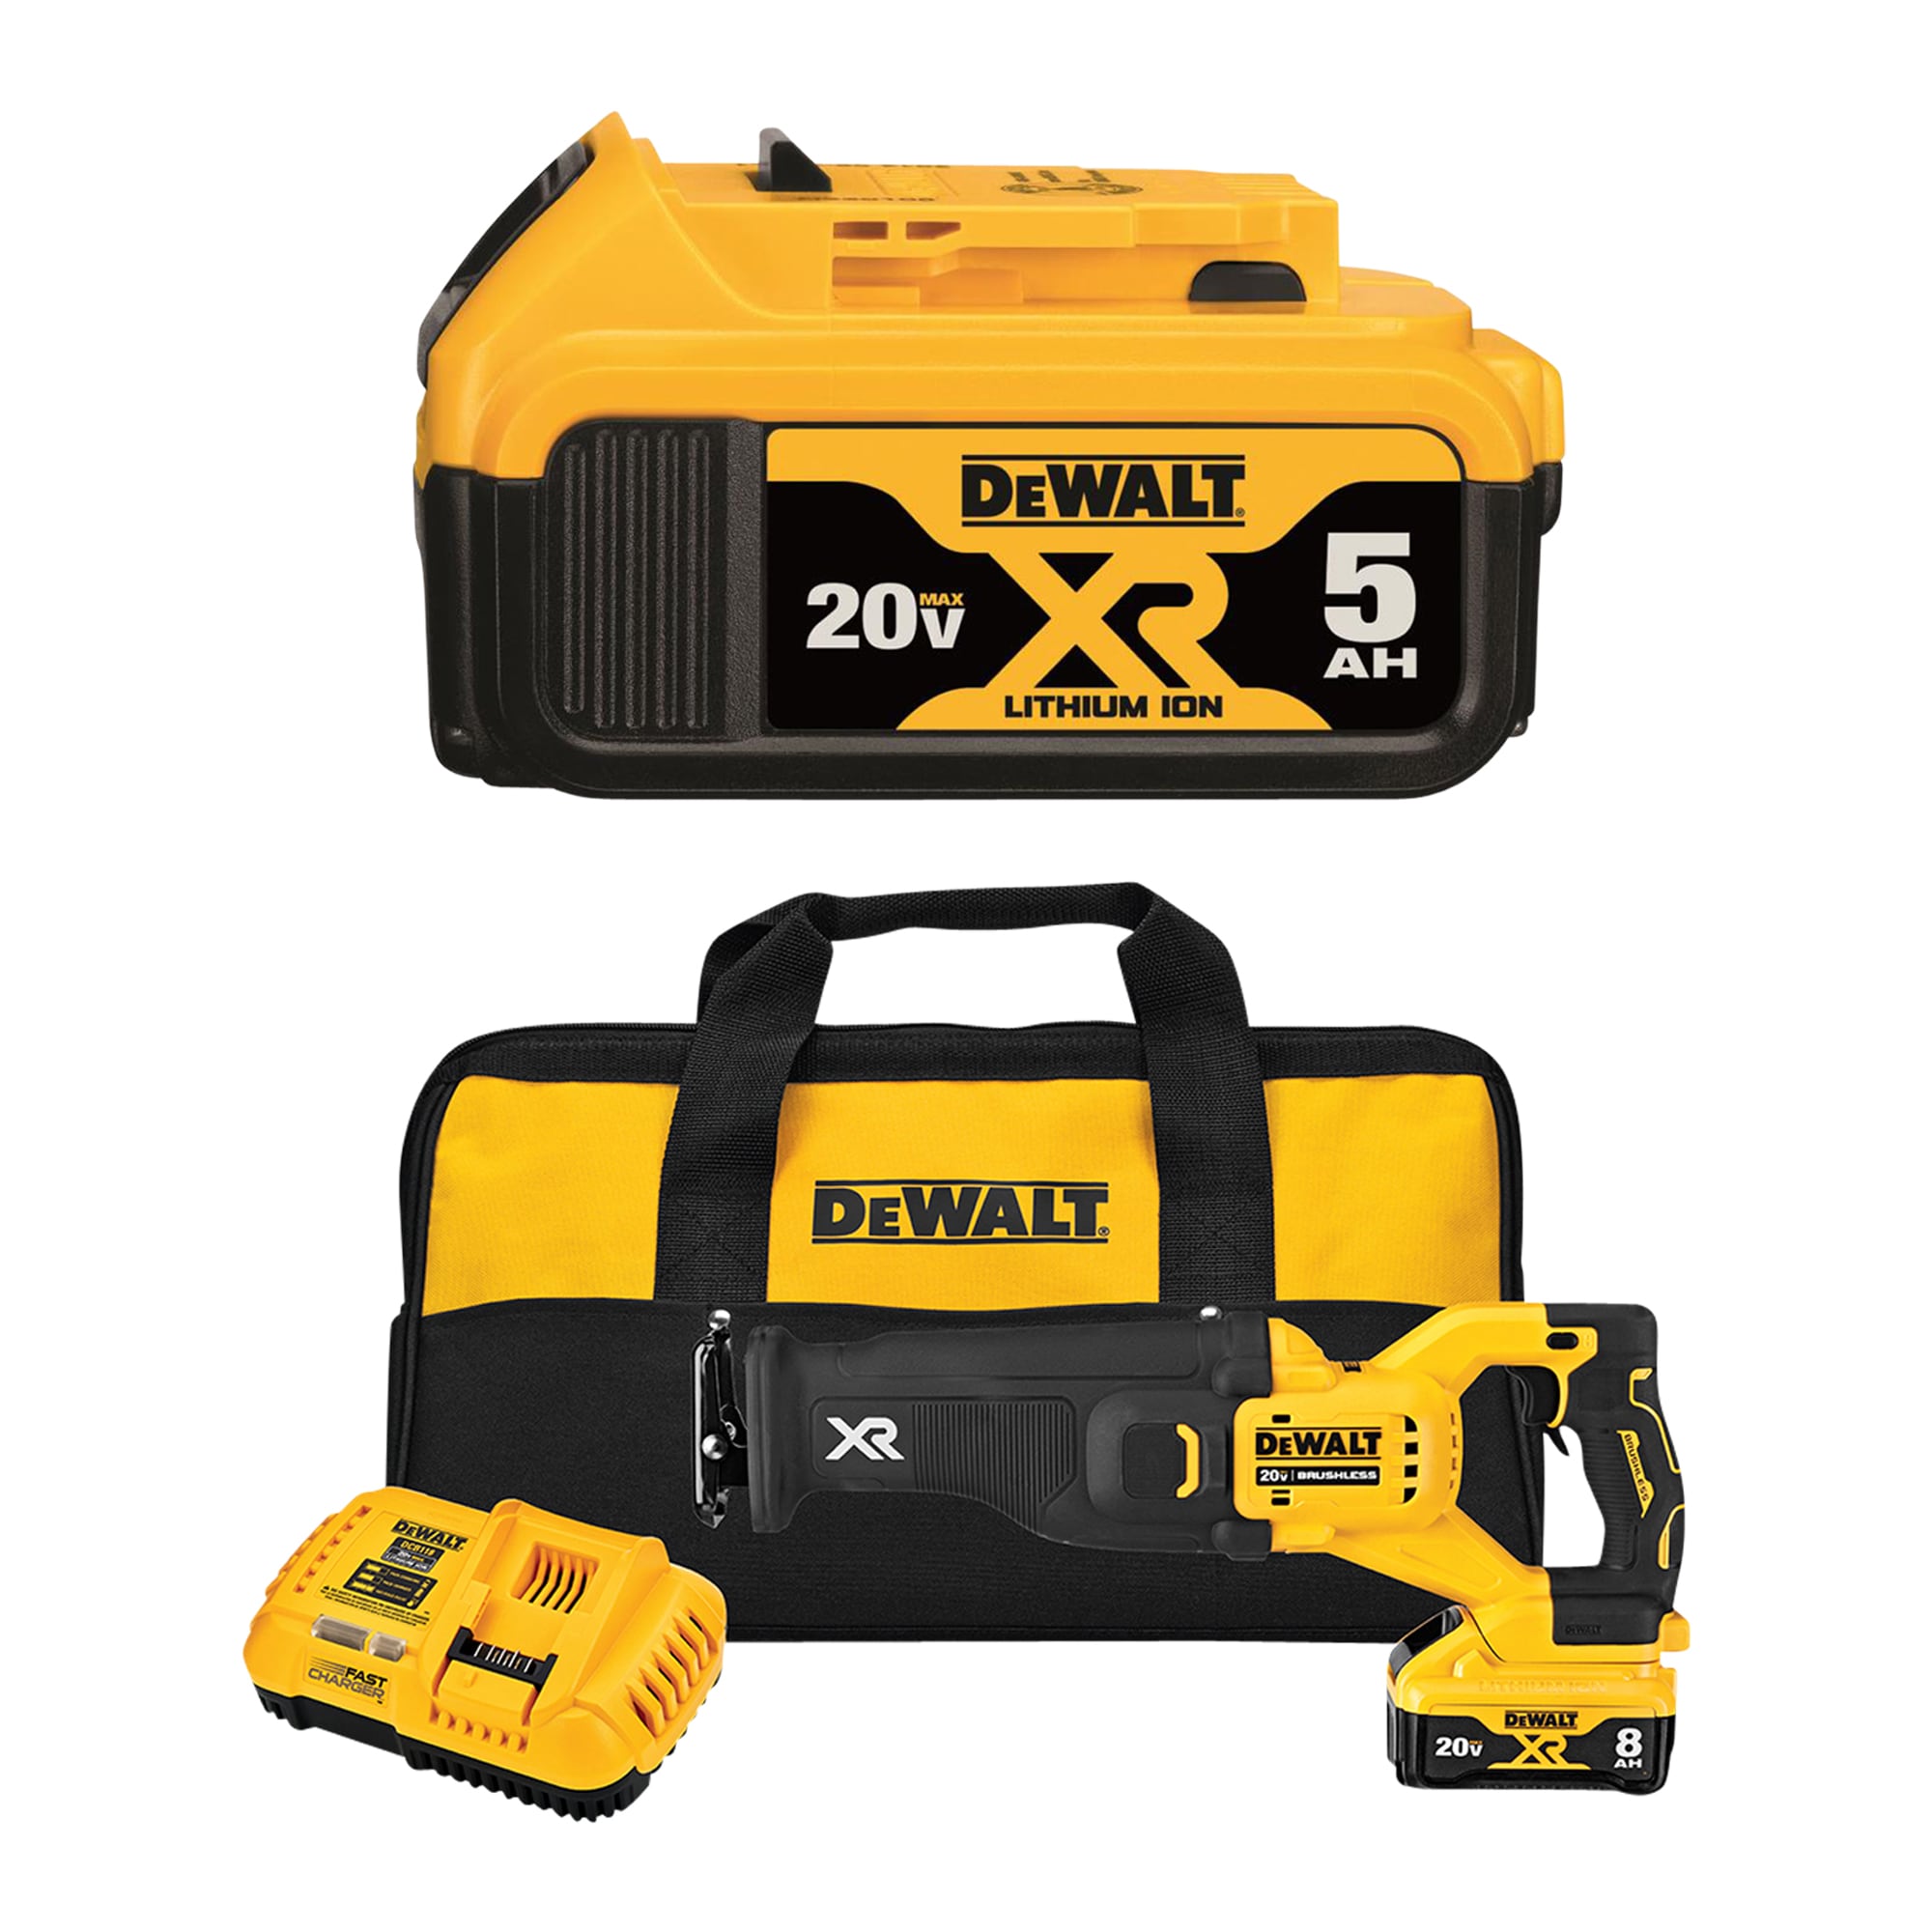 DEWALT XR 20-Volt Max 5 Amp-Hour Lithium Power Tool Battery & XR POWER DETECT 20-volt Max Variable Speed Brushless Cordless Reciprocating Saw